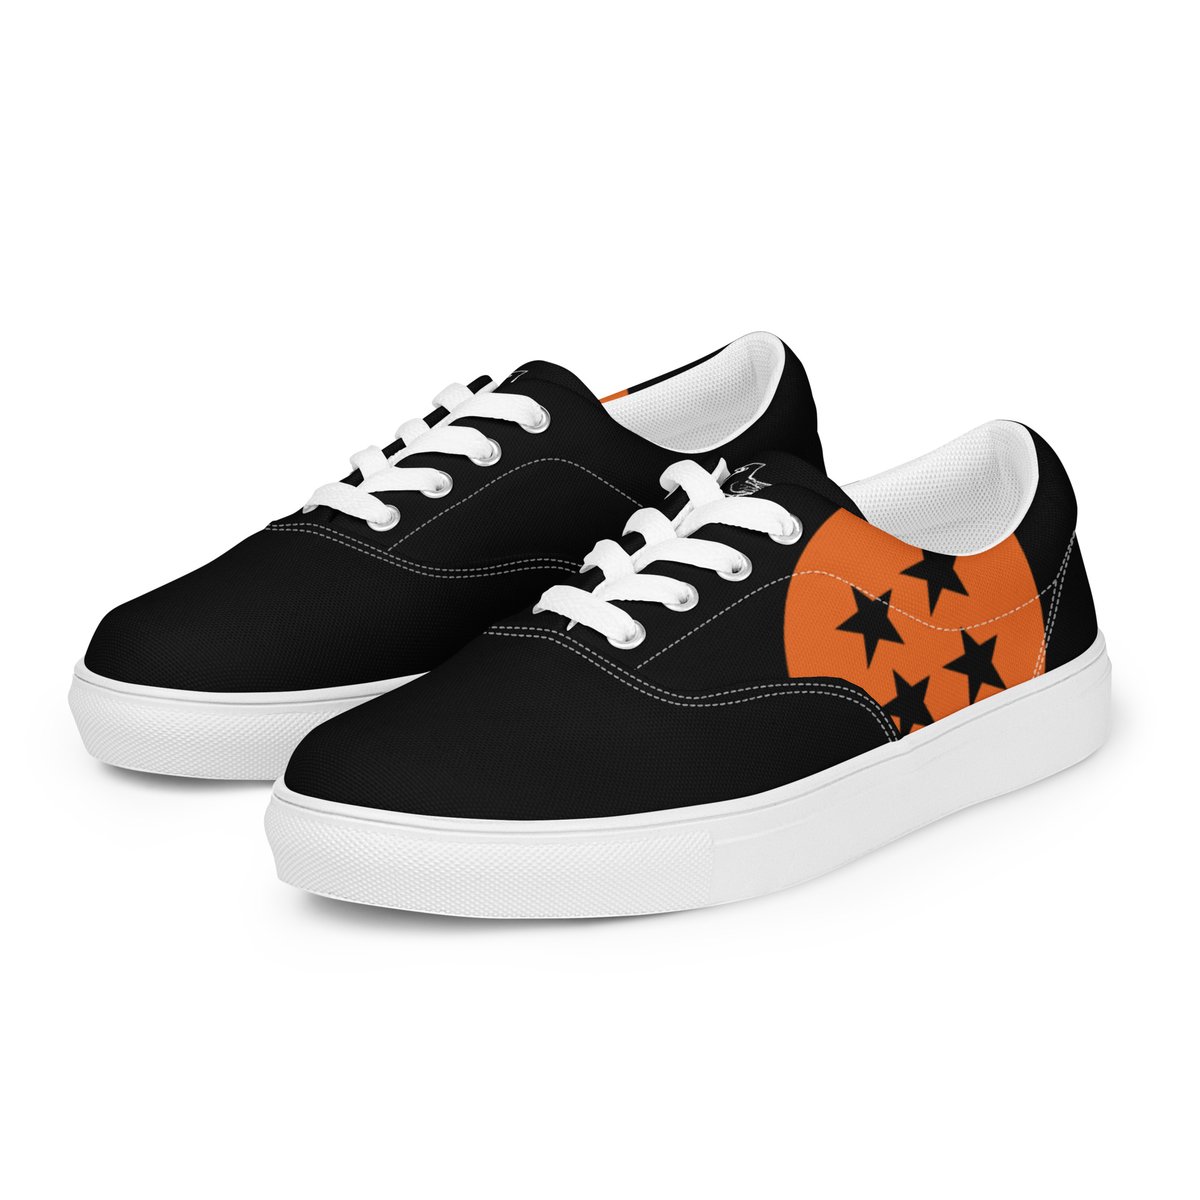 Image of Four Star Lifestyle Shoes Black